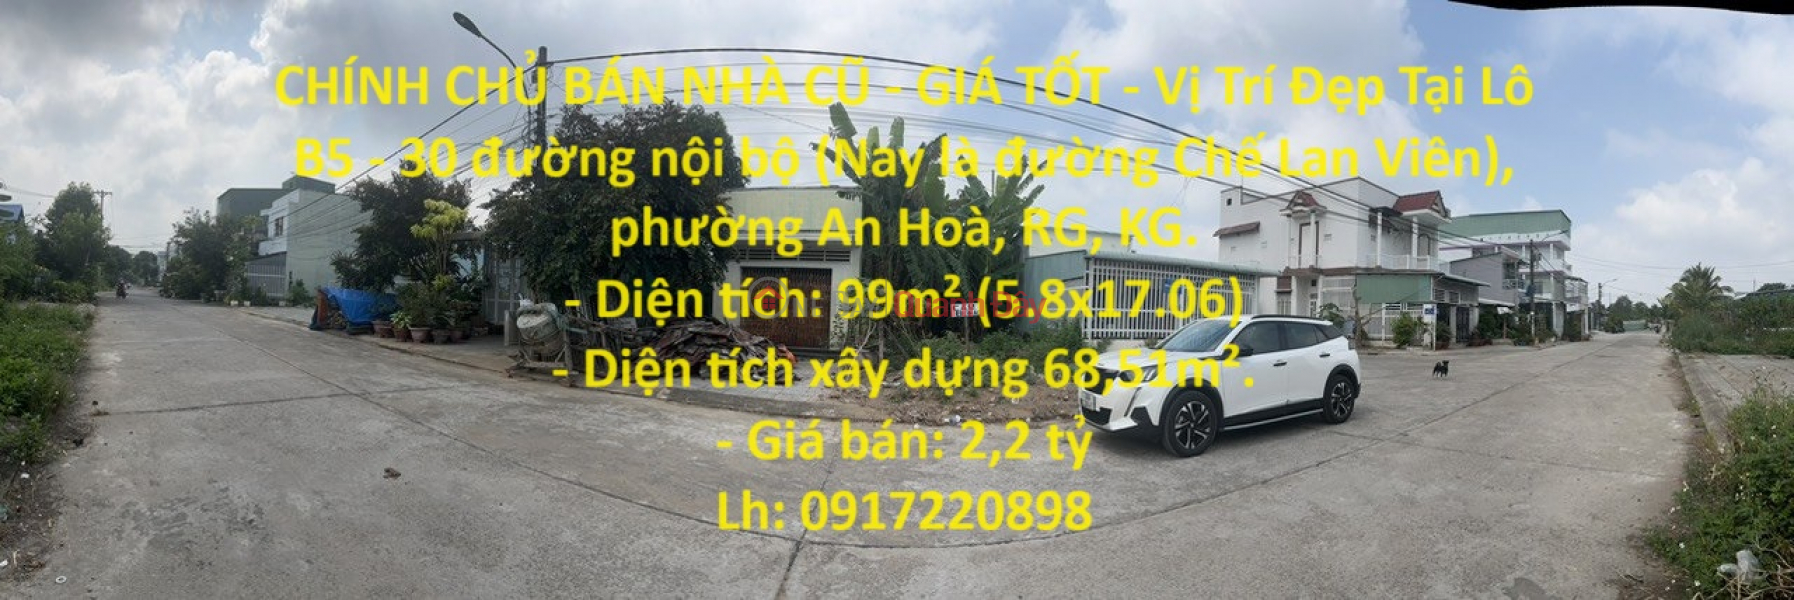 OLD HOUSE FOR SALE BY OWNER - GOOD PRICE - Nice Location On Che Lan Vien Street, An Hoa, Rach Gia City, Kien Giang Sales Listings